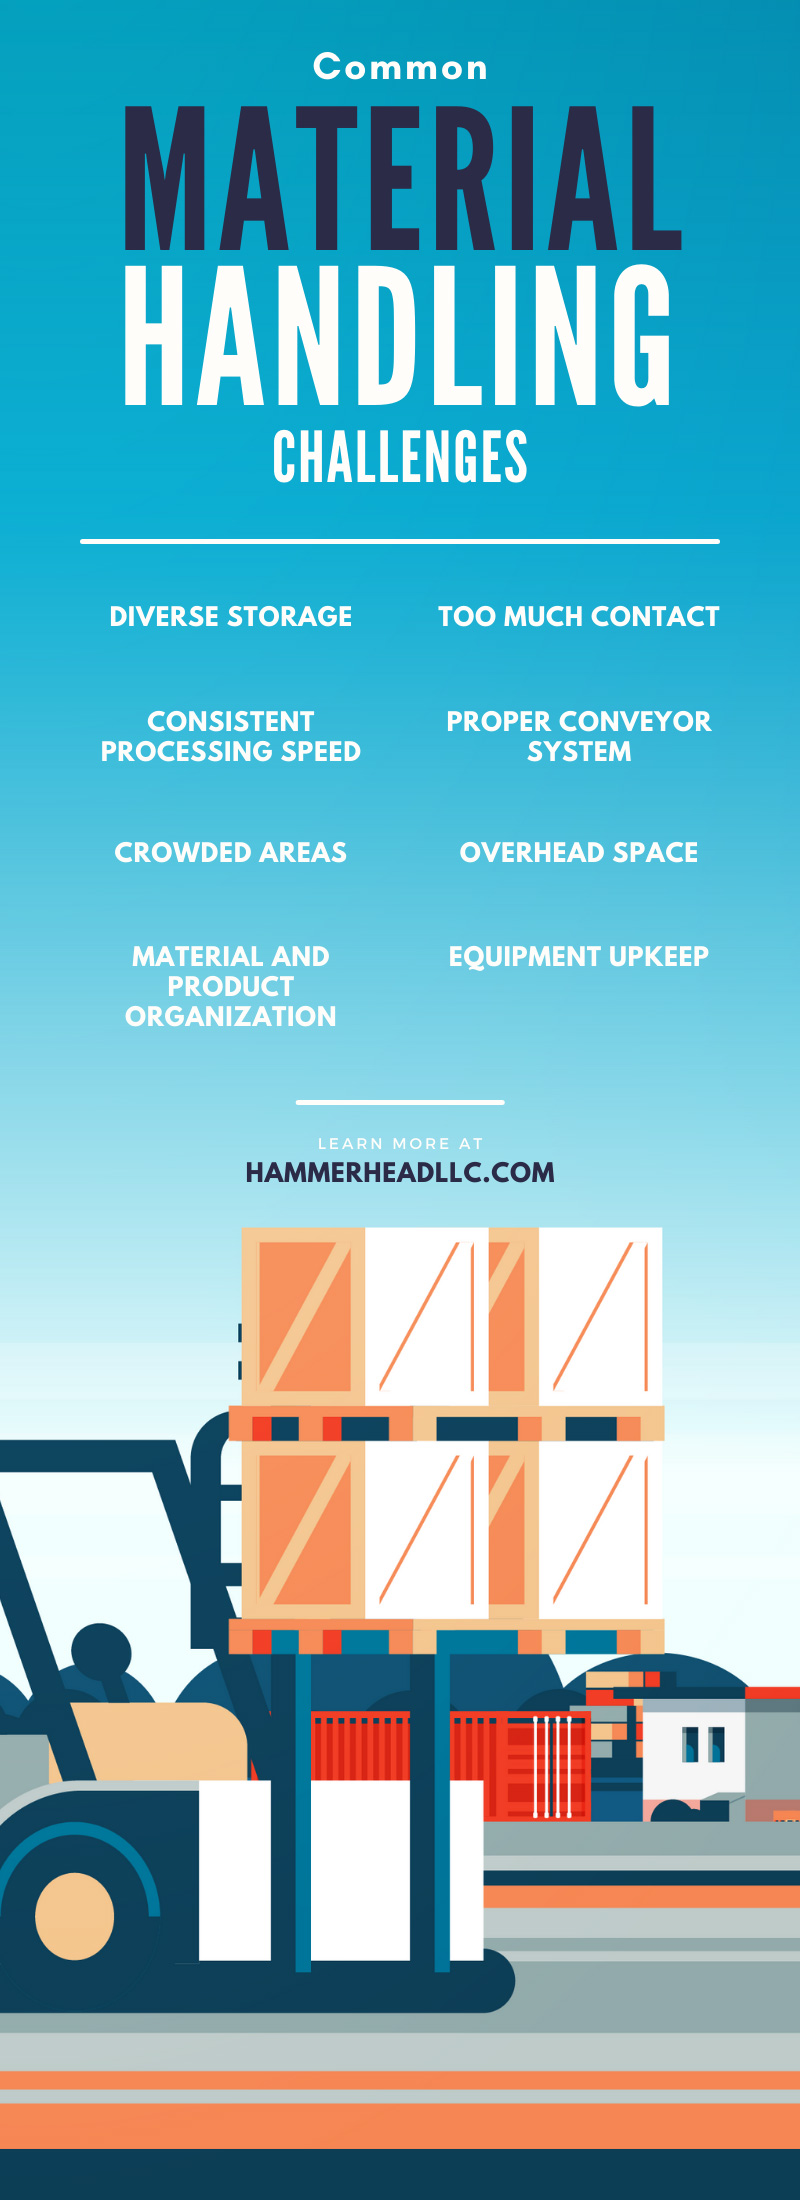 Common Material Handling Challenges